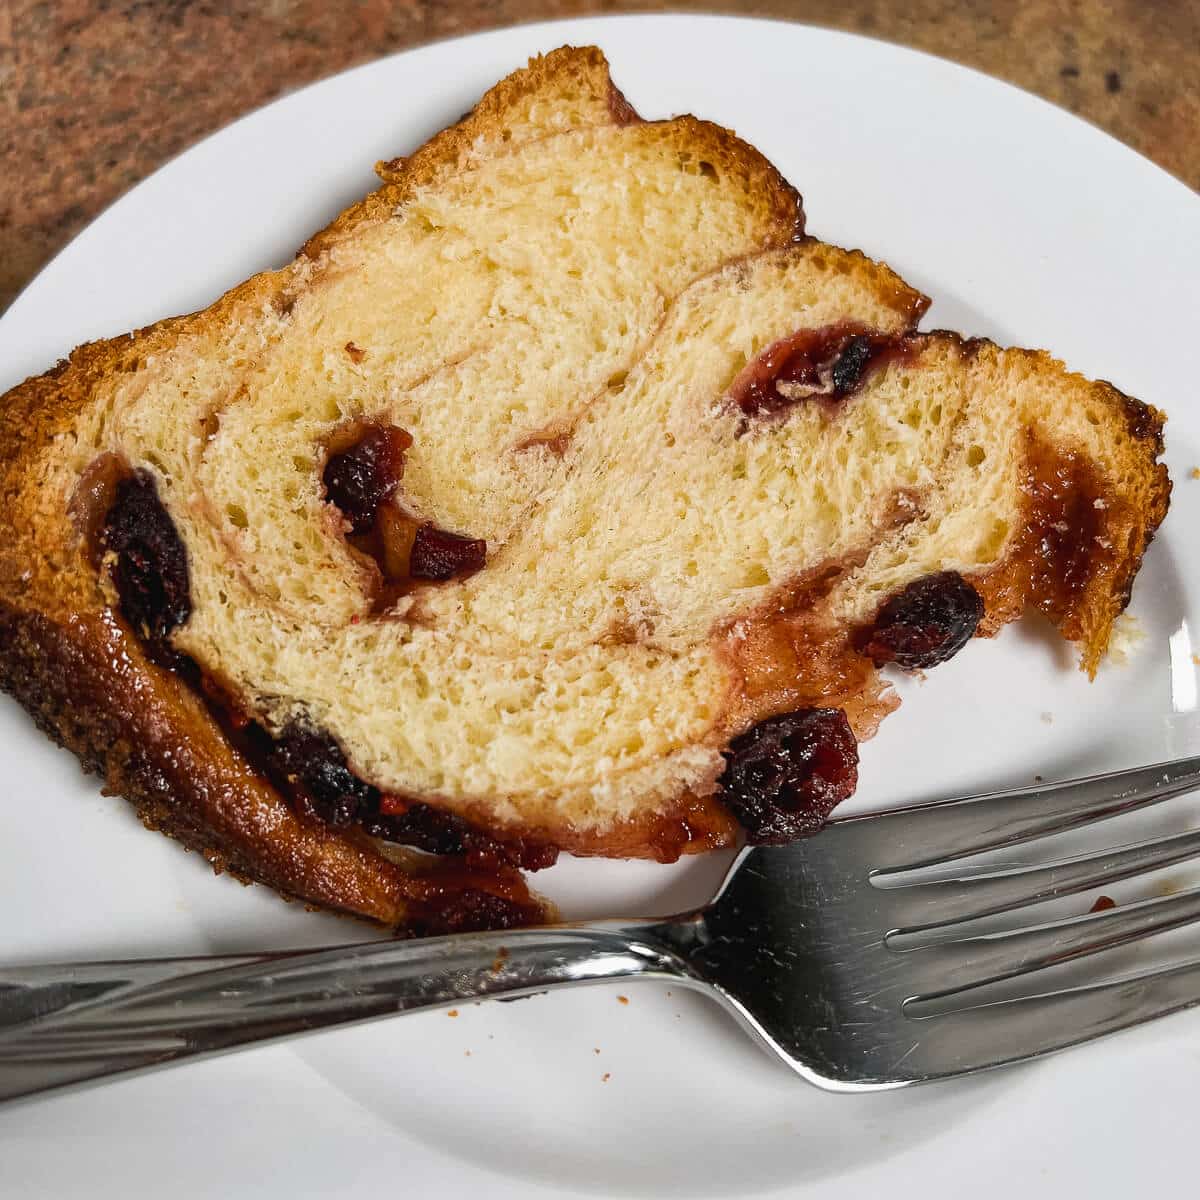 Slice of cranberry cinnamon swirl bread on a white plate next to a fork.